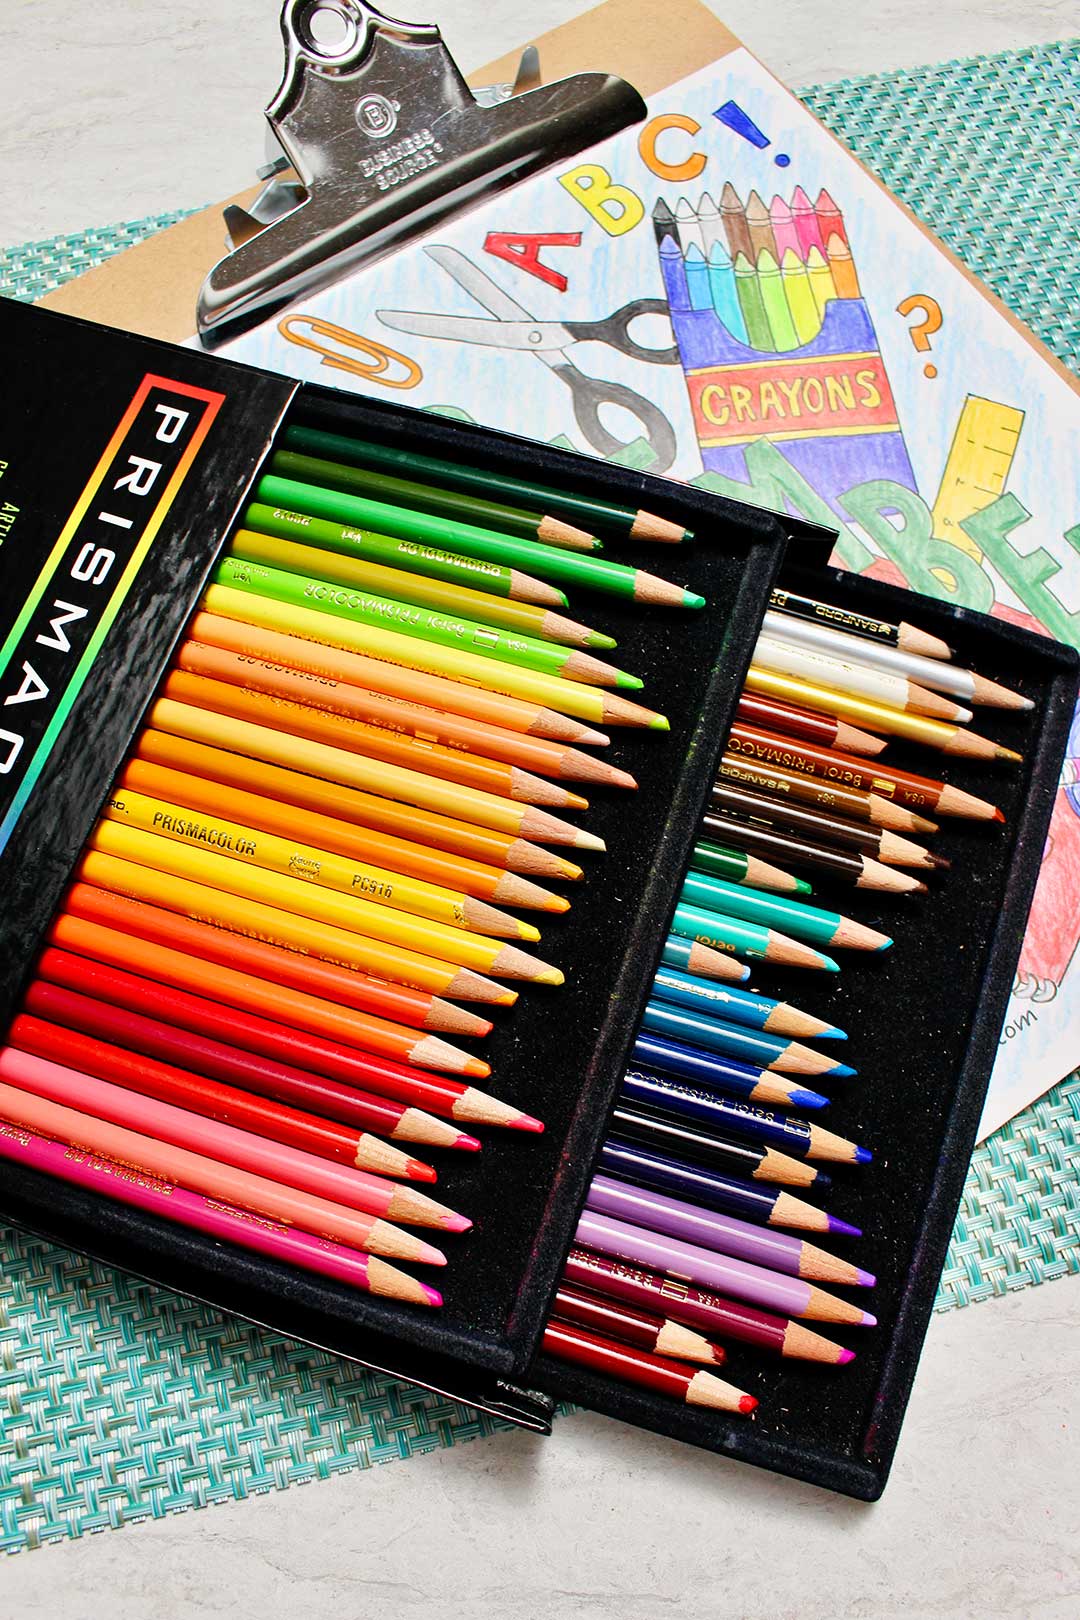 Colored pencils in rainbow order on top of a completed September coloring sheet.